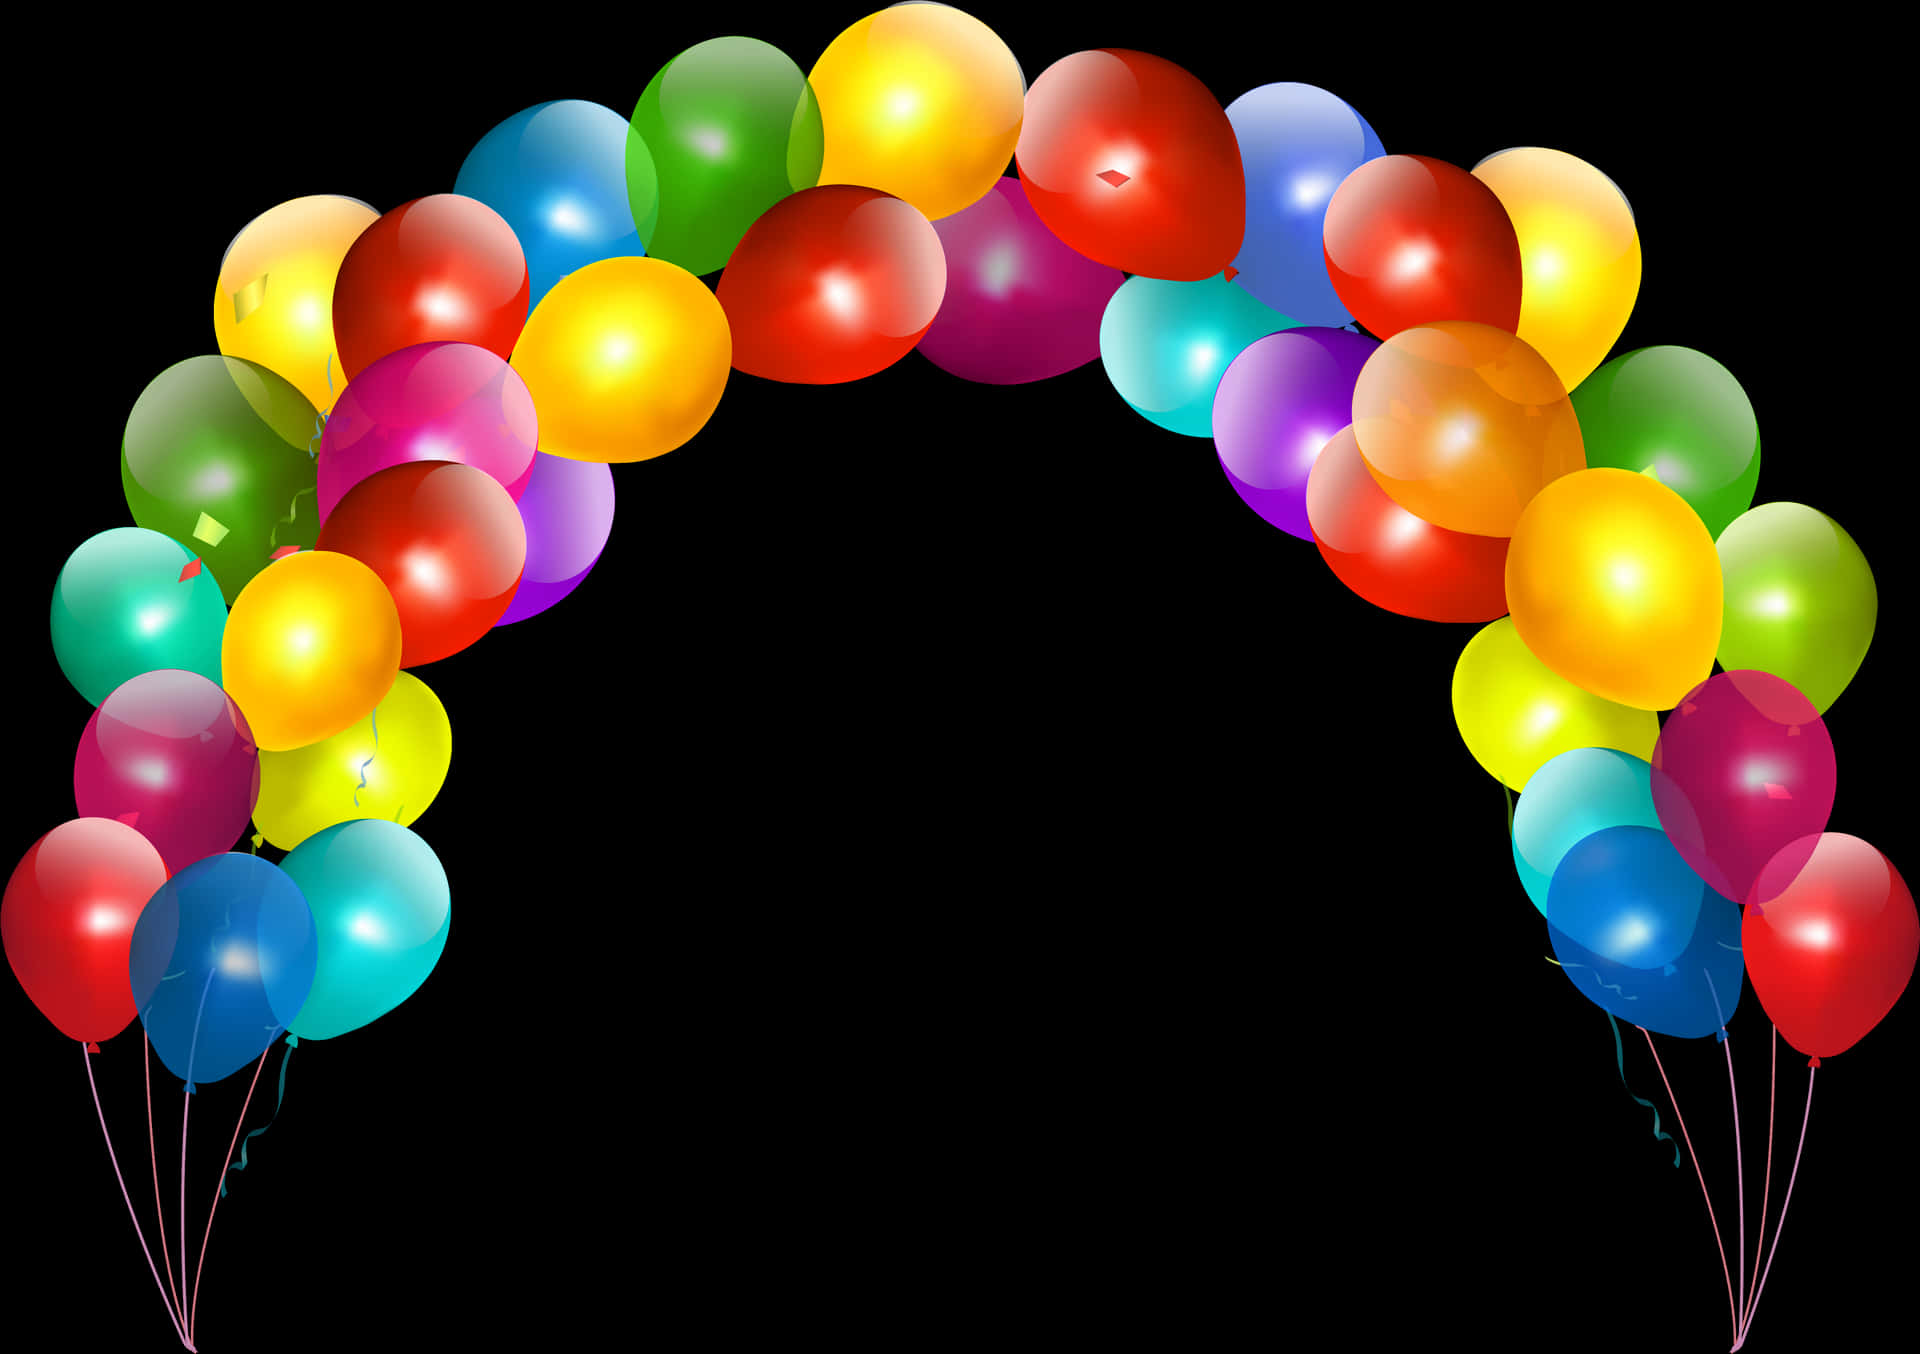 Colorful Balloon Arch.jpg PNG image